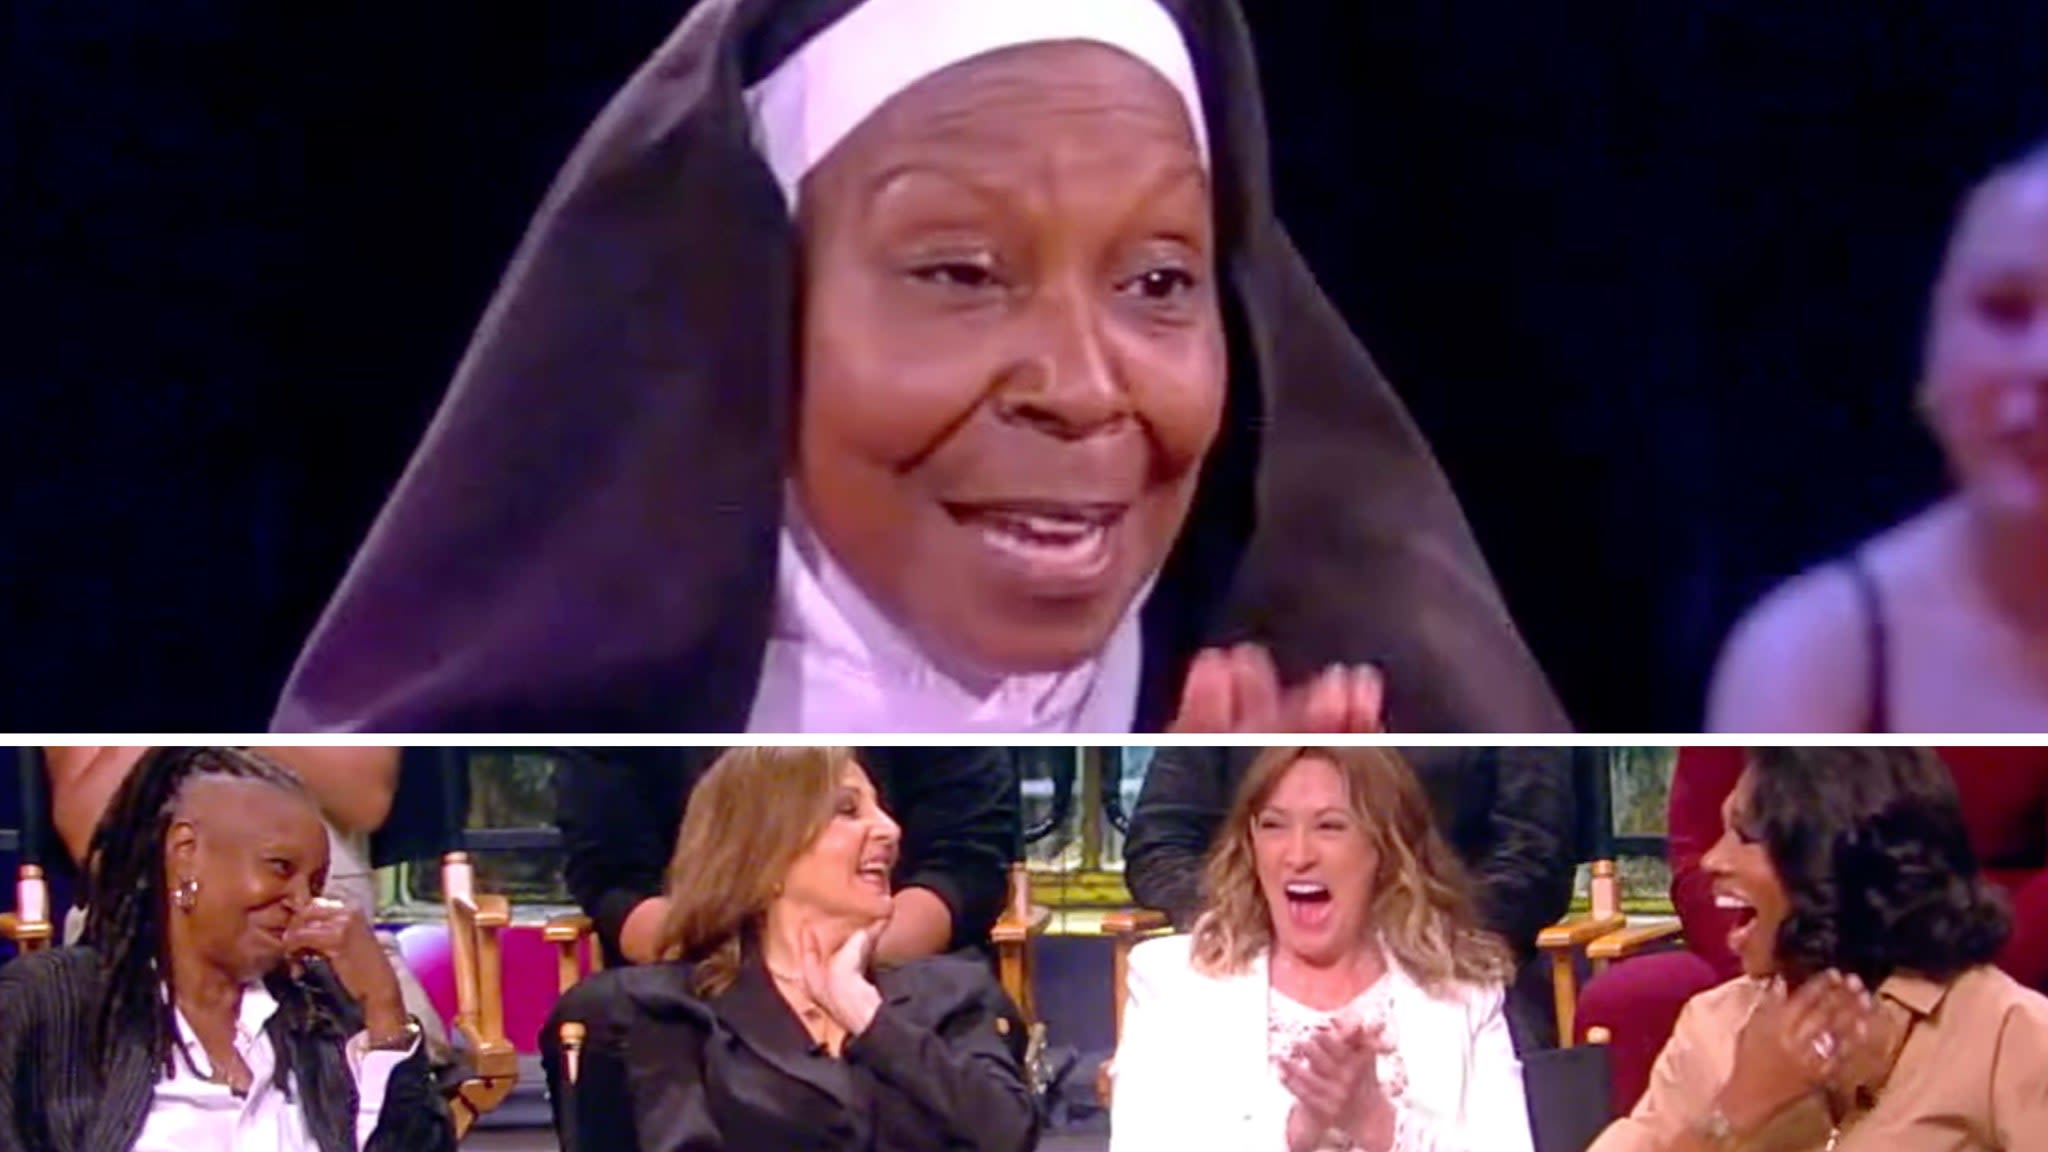 Whoopi Goldberg Celebrates 30 Years of Sister Act 2 With Cast Reunion on The View